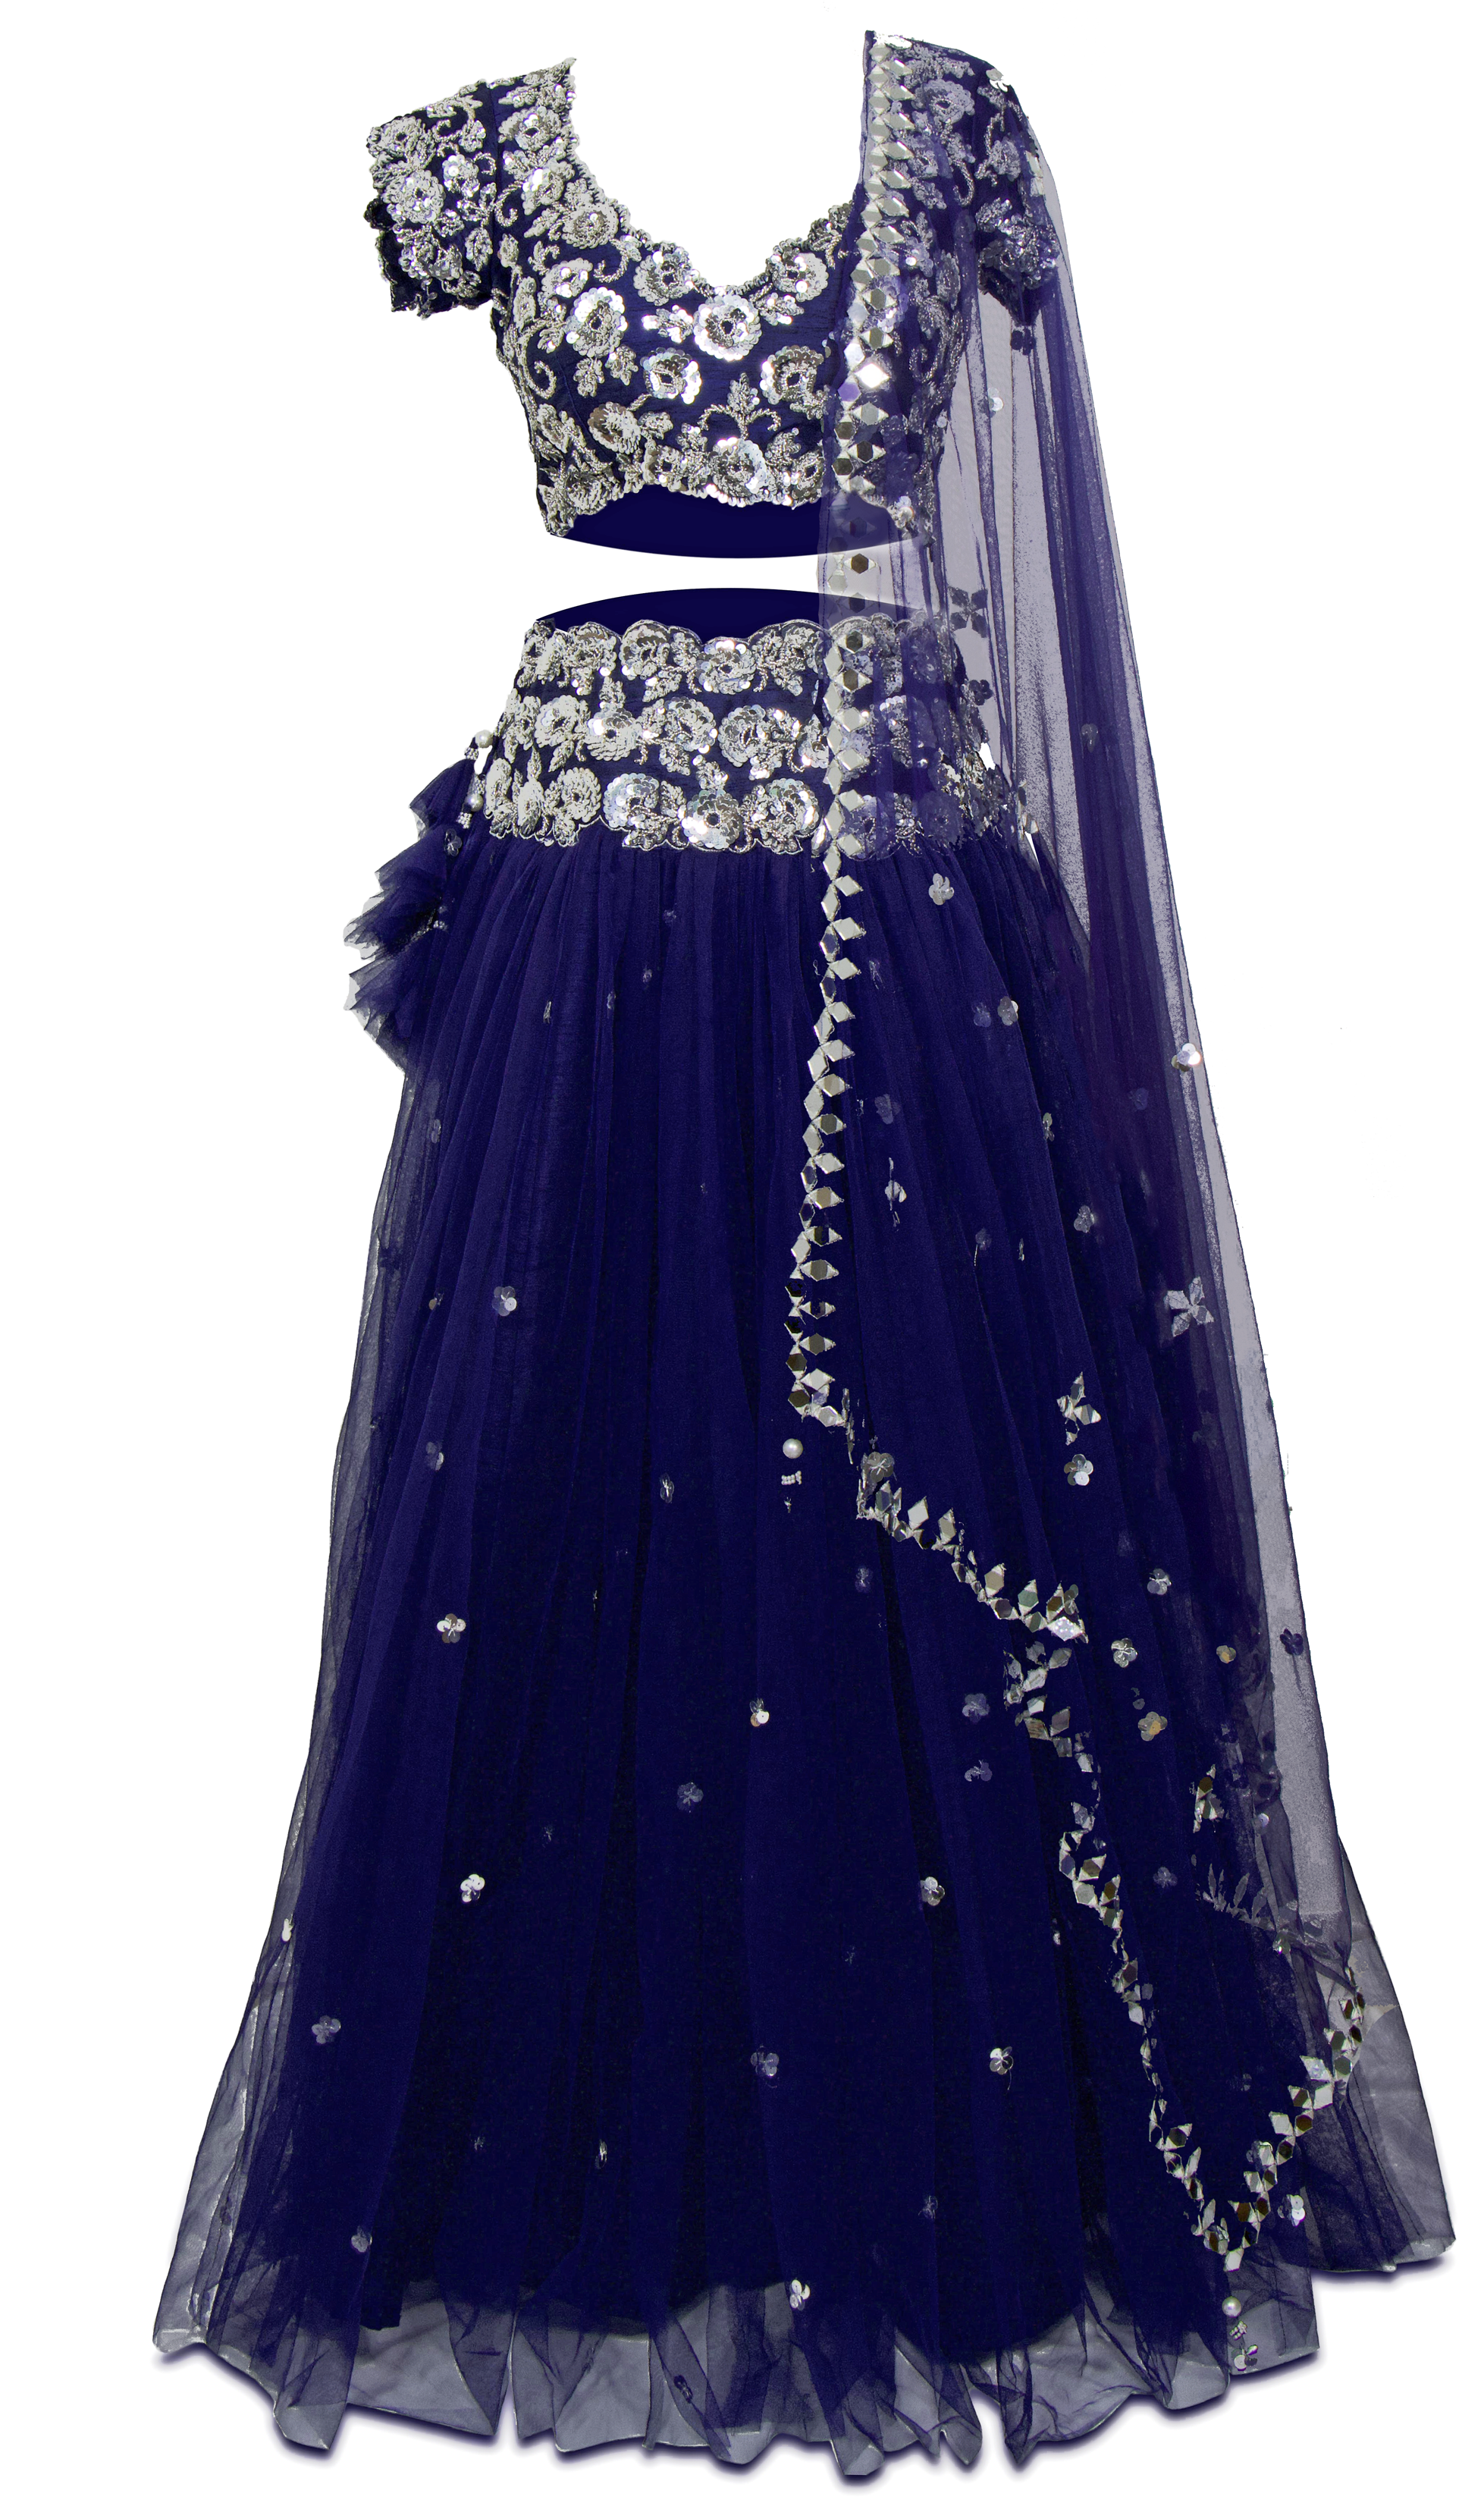 Stunning lehenga with blue blouse in dupion silk base with sequins embroidery. Designer: Preeti S Kapoor